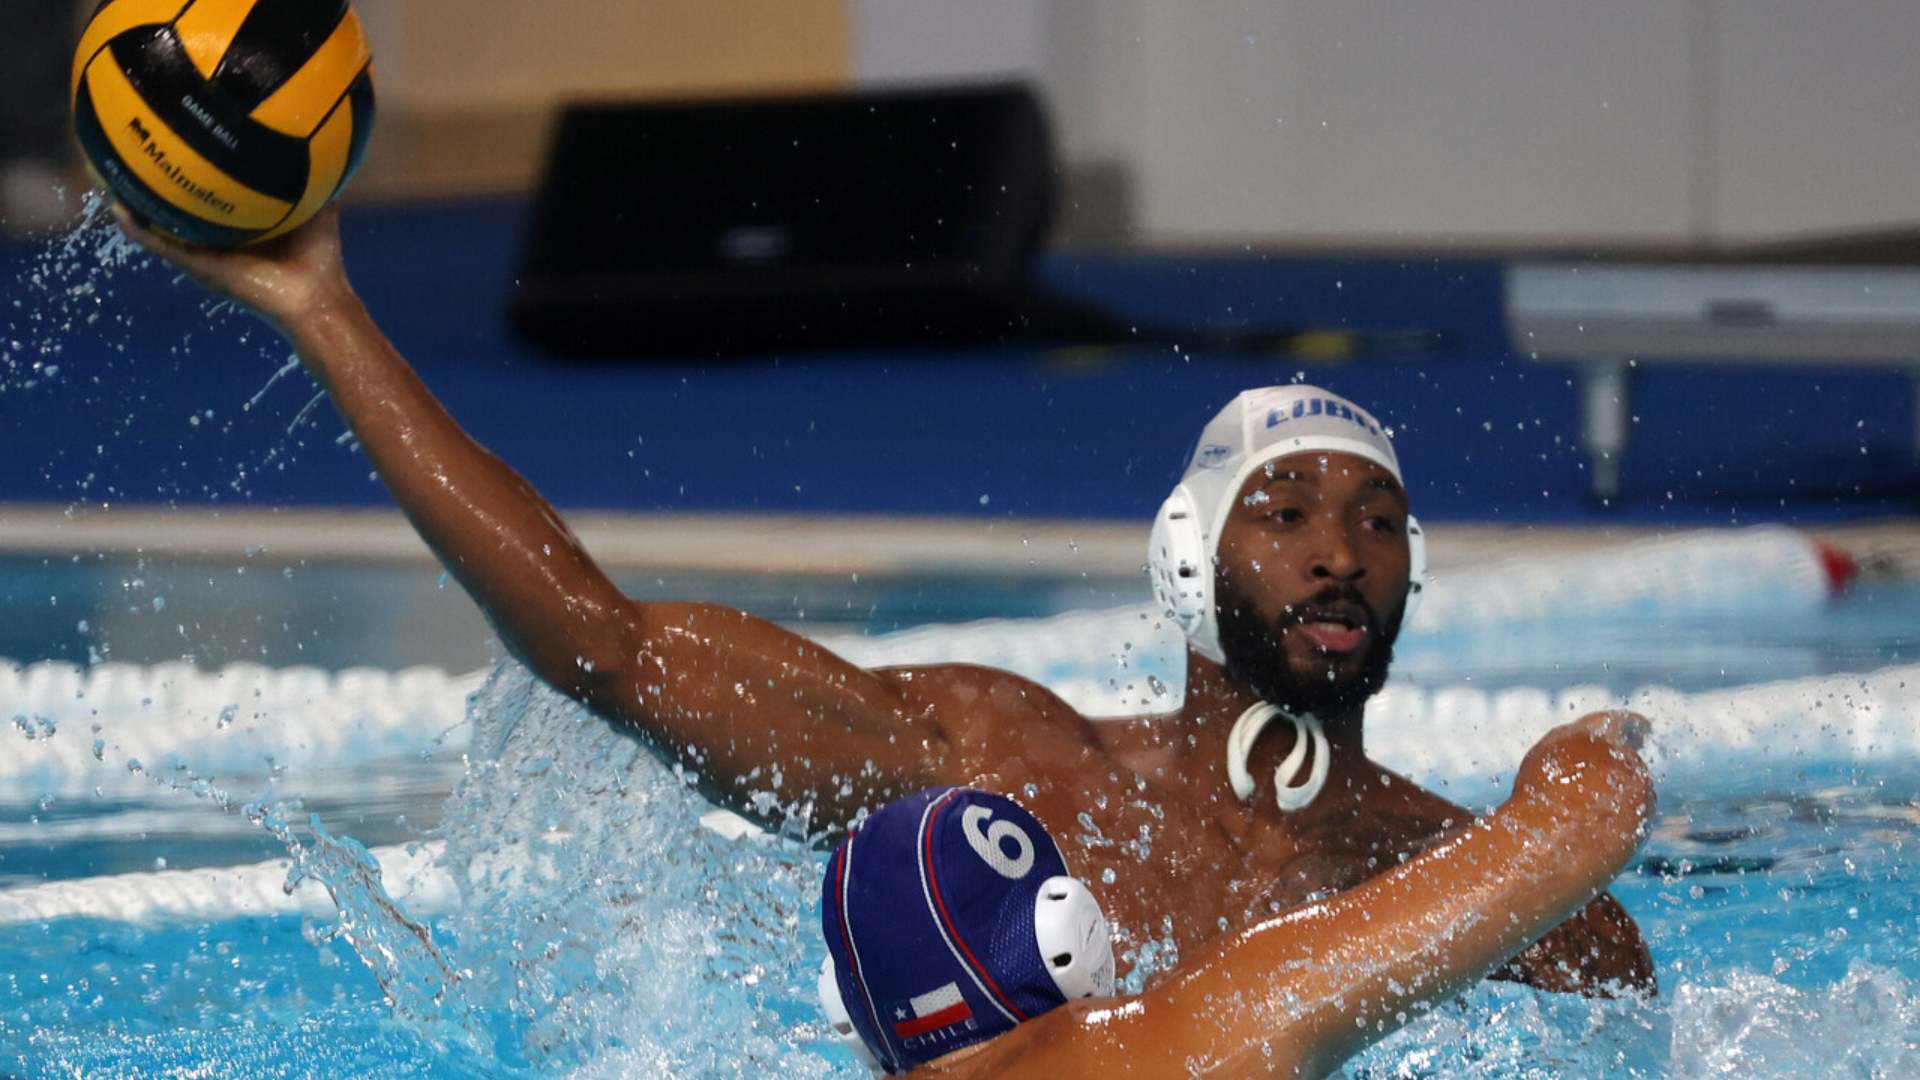 Cuba beats Chile in the conclusion of Group B in water polo